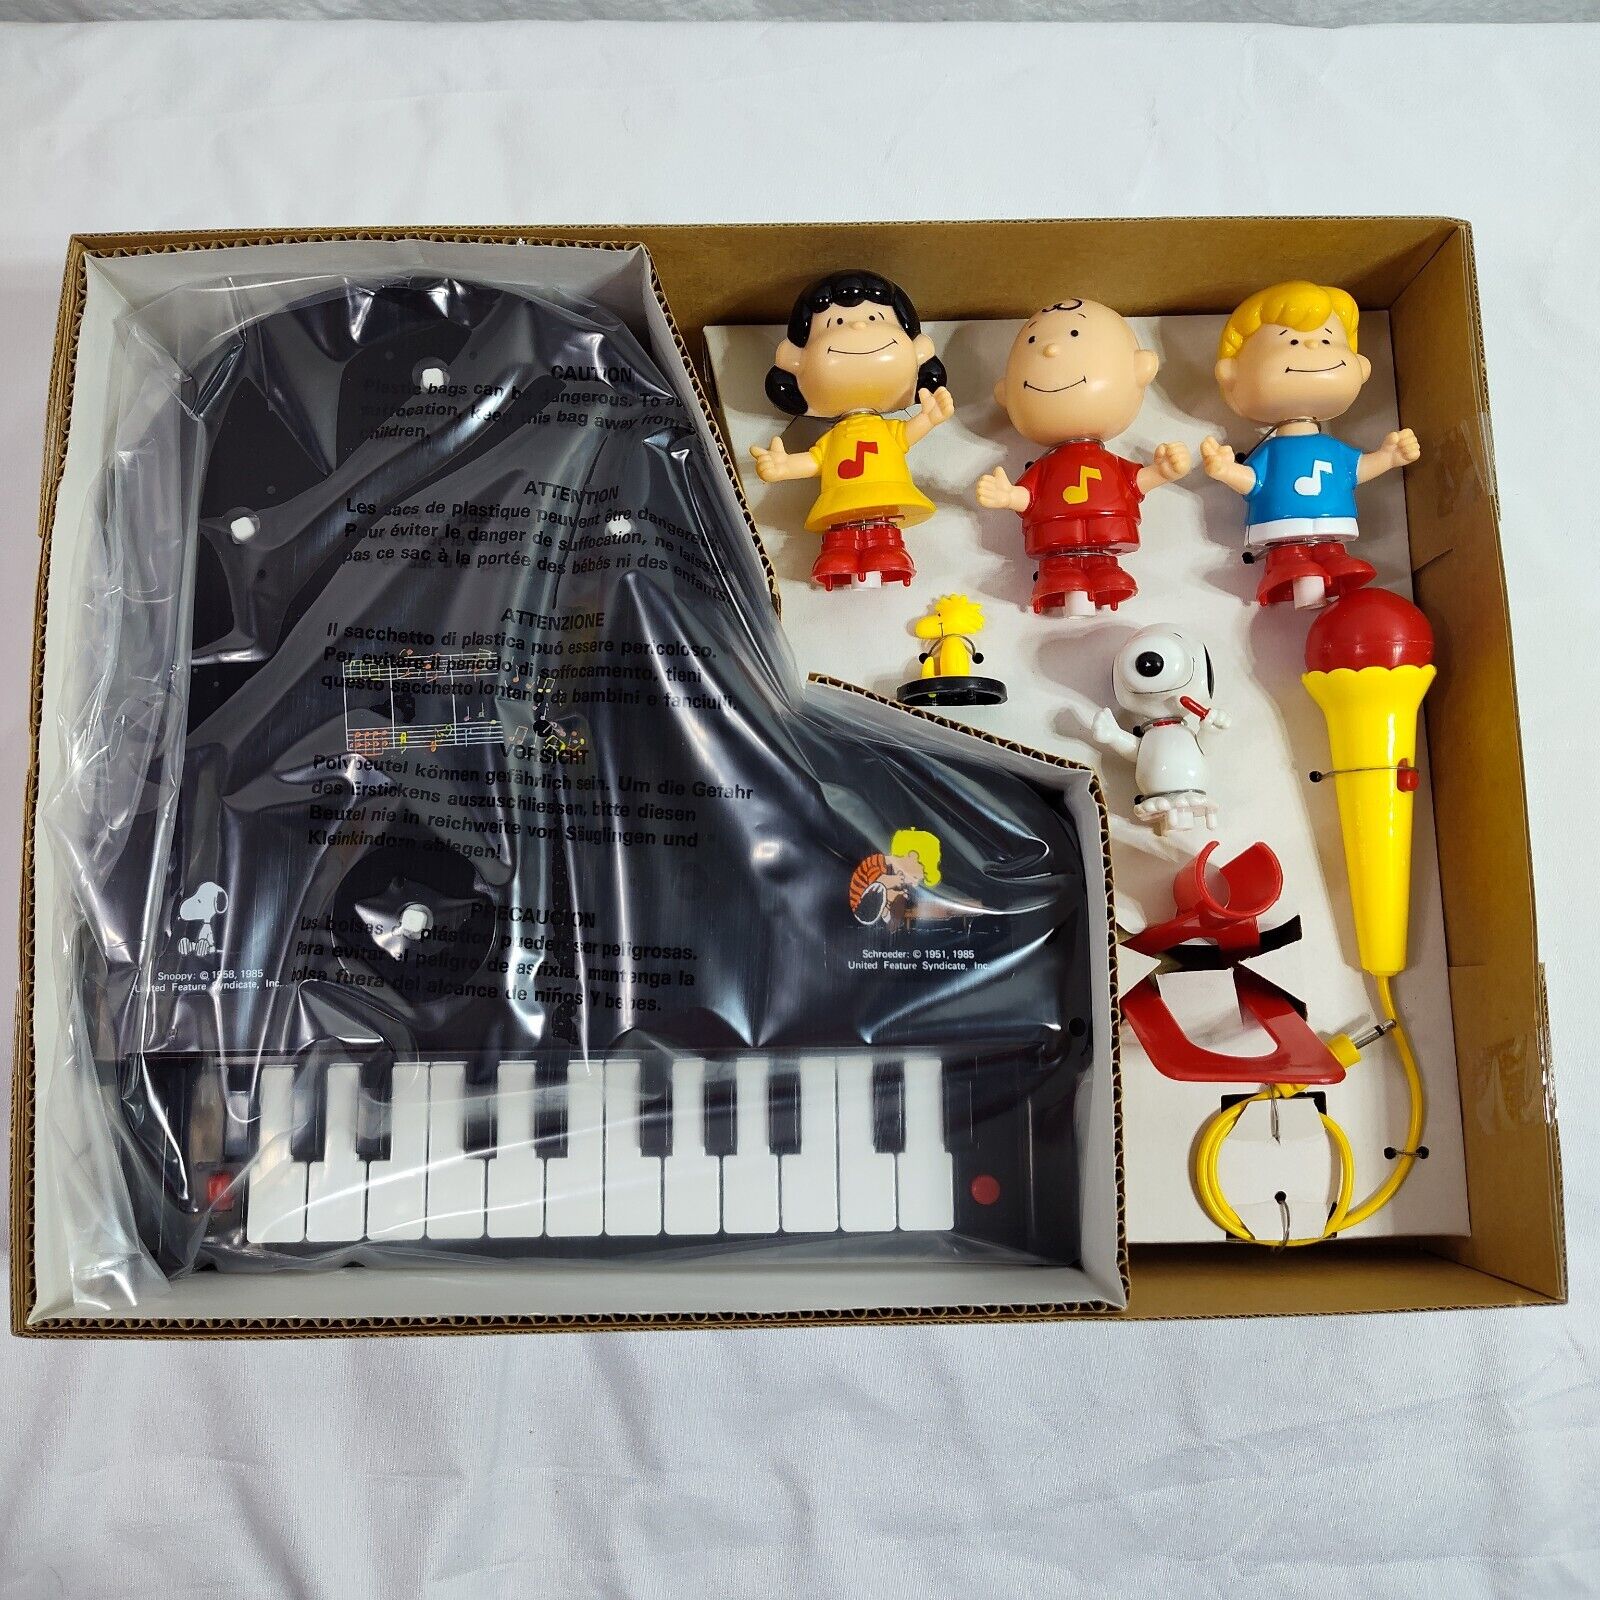 Peanuts Schroeder Piano Battery Operated Vintage 1985 Snoopy Lucy Charlie Brown